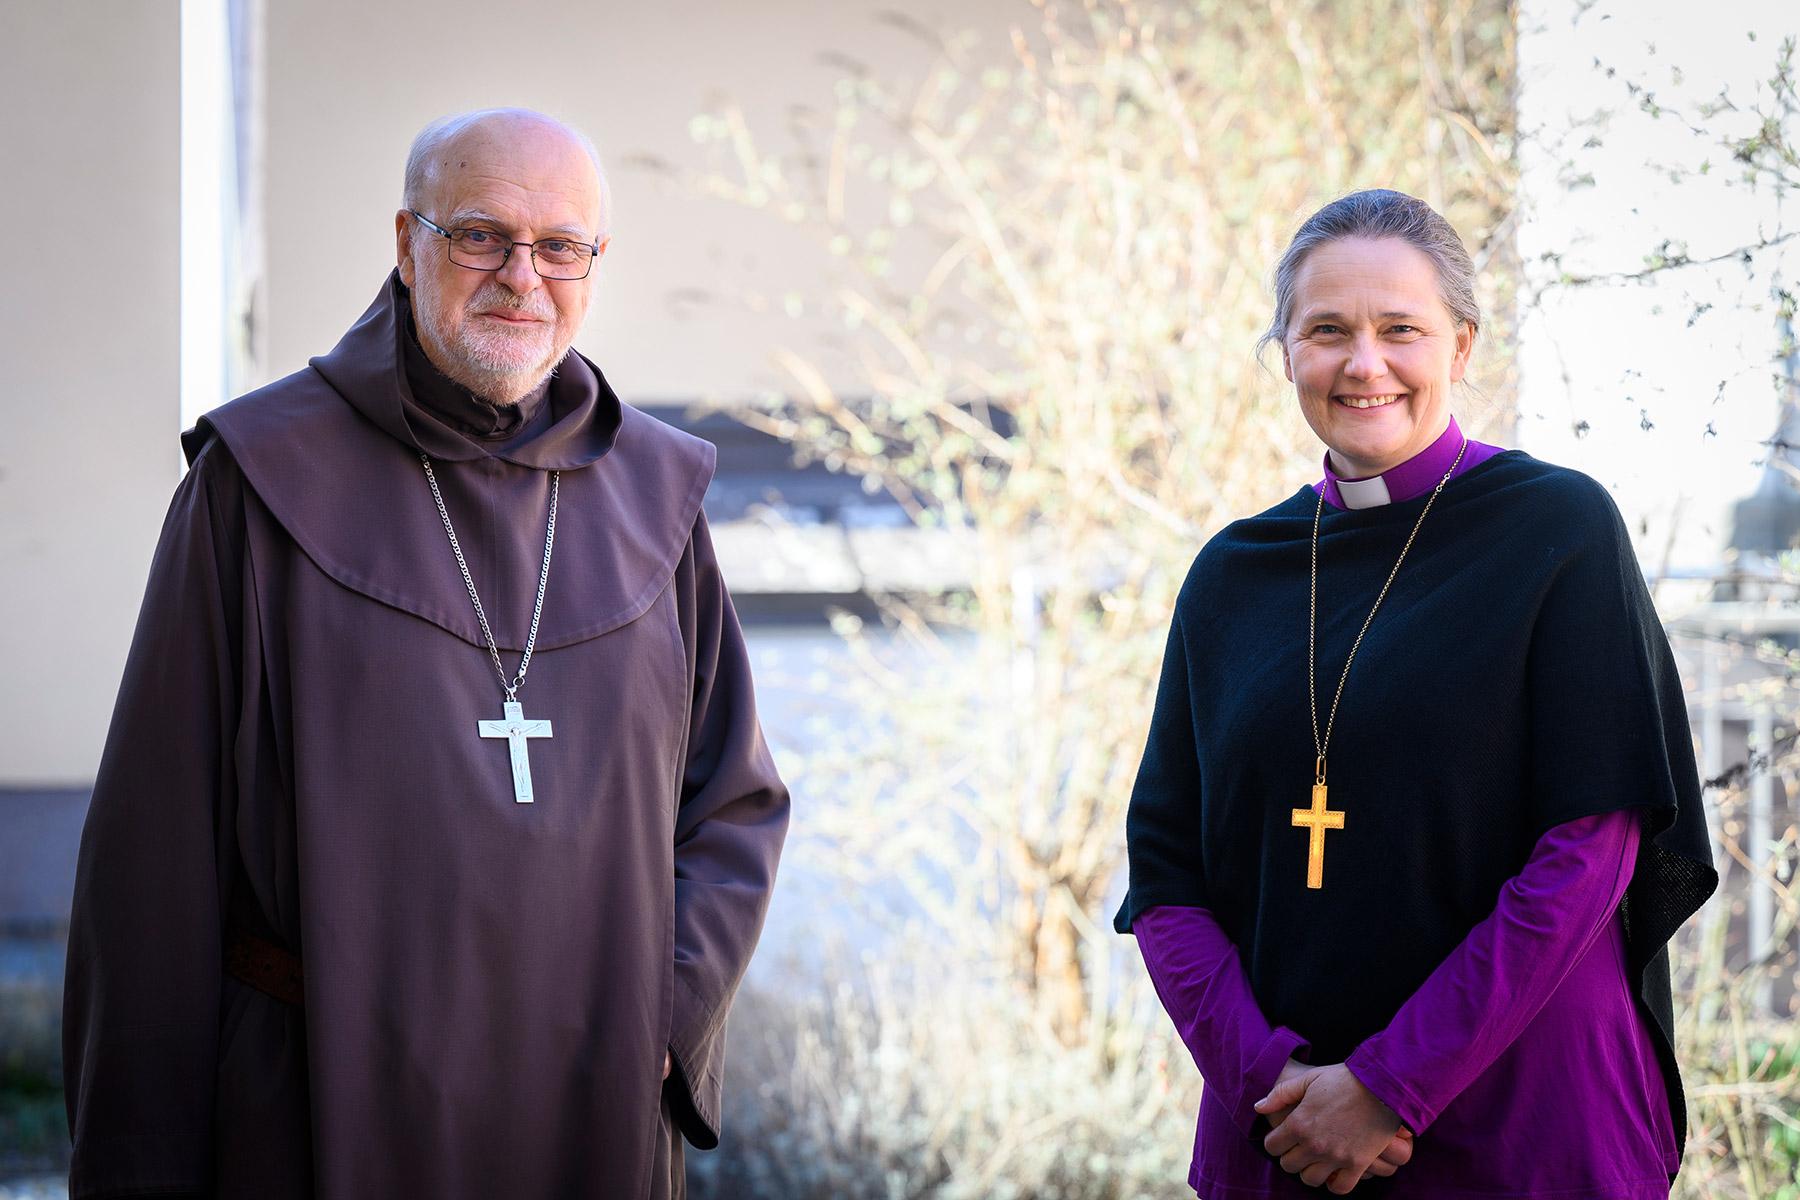 Catholic Bishop of Stockholm Cardinal Anders Arborelius and Lutheran Bishop of Uppsala Karin Johannesson lead the weekly ecumenical retreats to celebrate the gifts of the Holy Spirit at Pentecost. Photo: Magnus Aronson